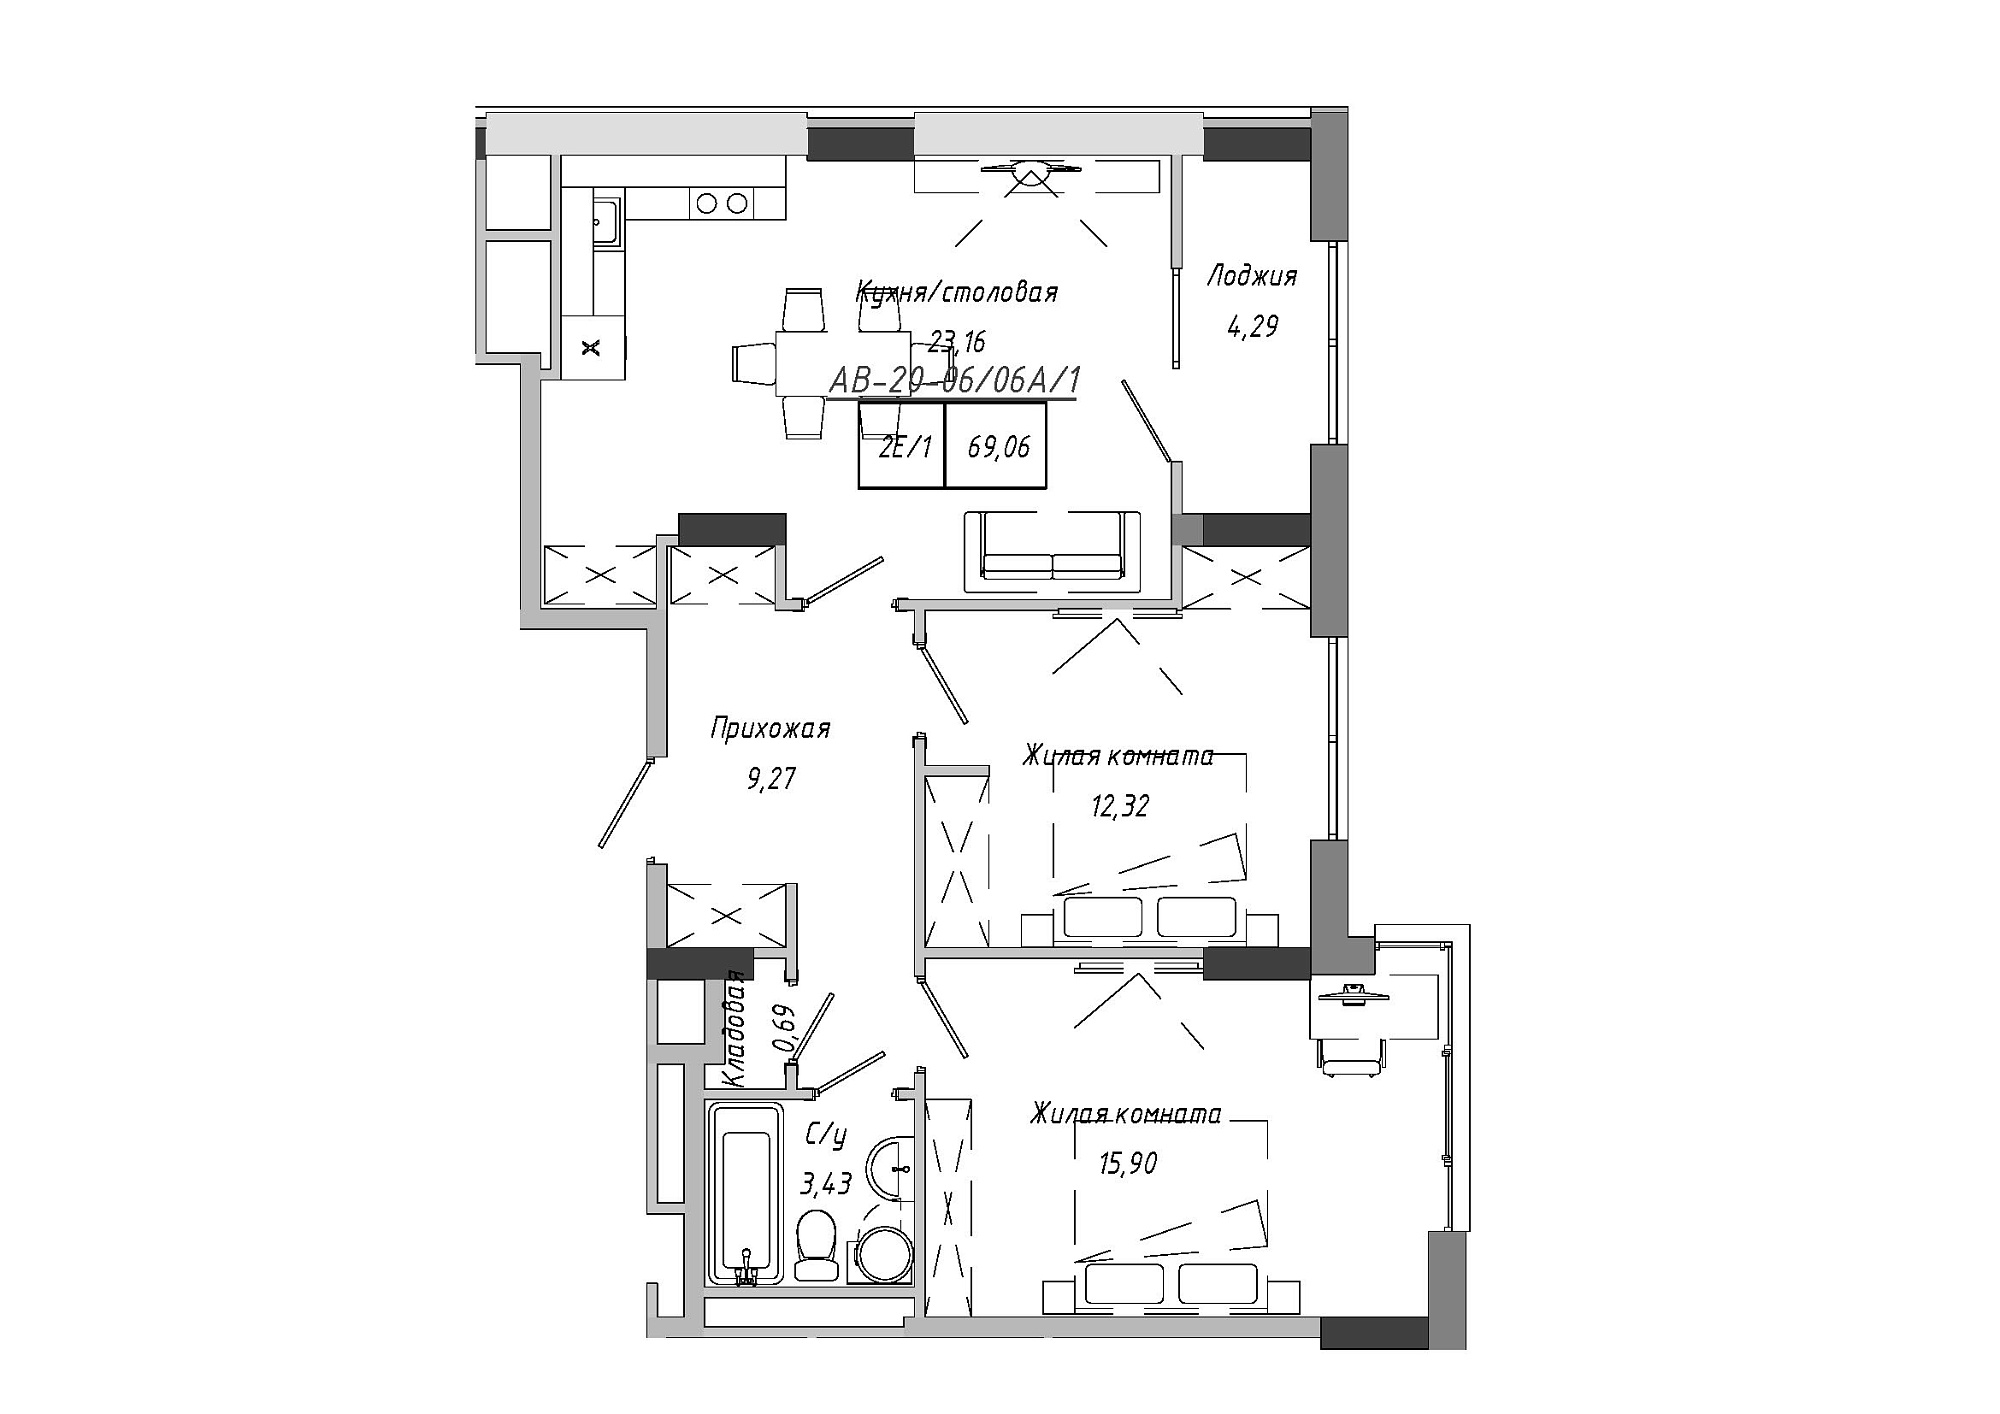 Planning 2-rm flats area 42.85m2, AB-20-06/0006а.